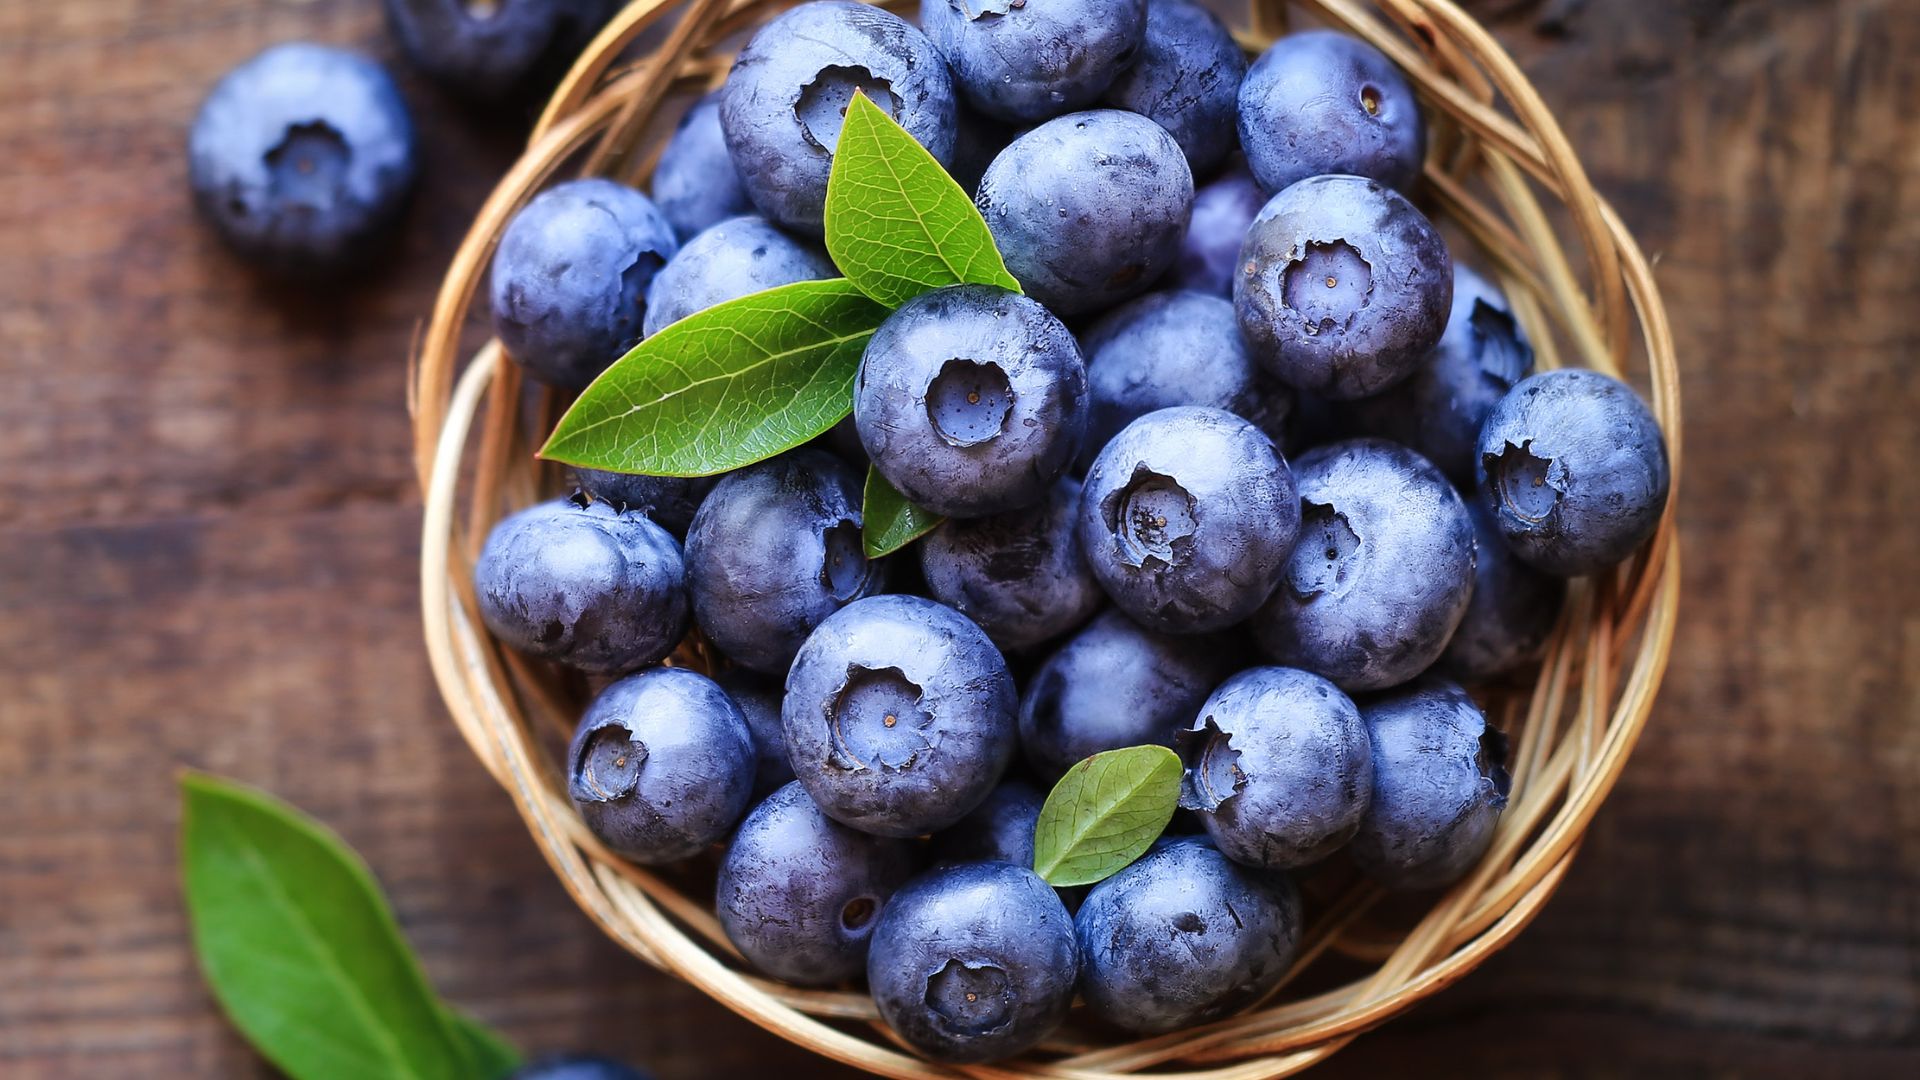 Blueberries are one of the Top 10 Foods for Optimal Gut Health